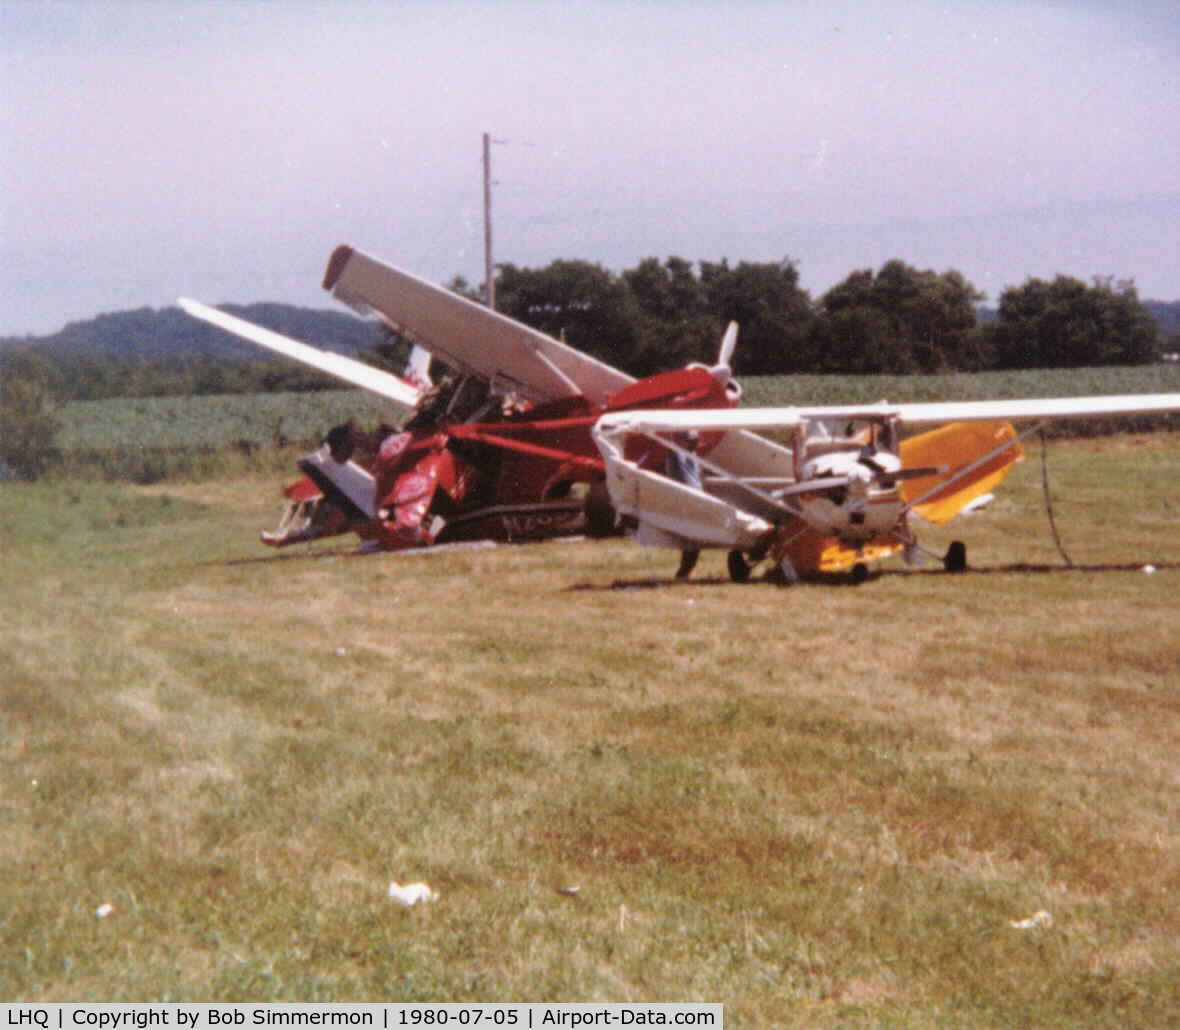 Fairfield County Airport (LHQ) - Tornado damage - Four of eight severely damaged planes.